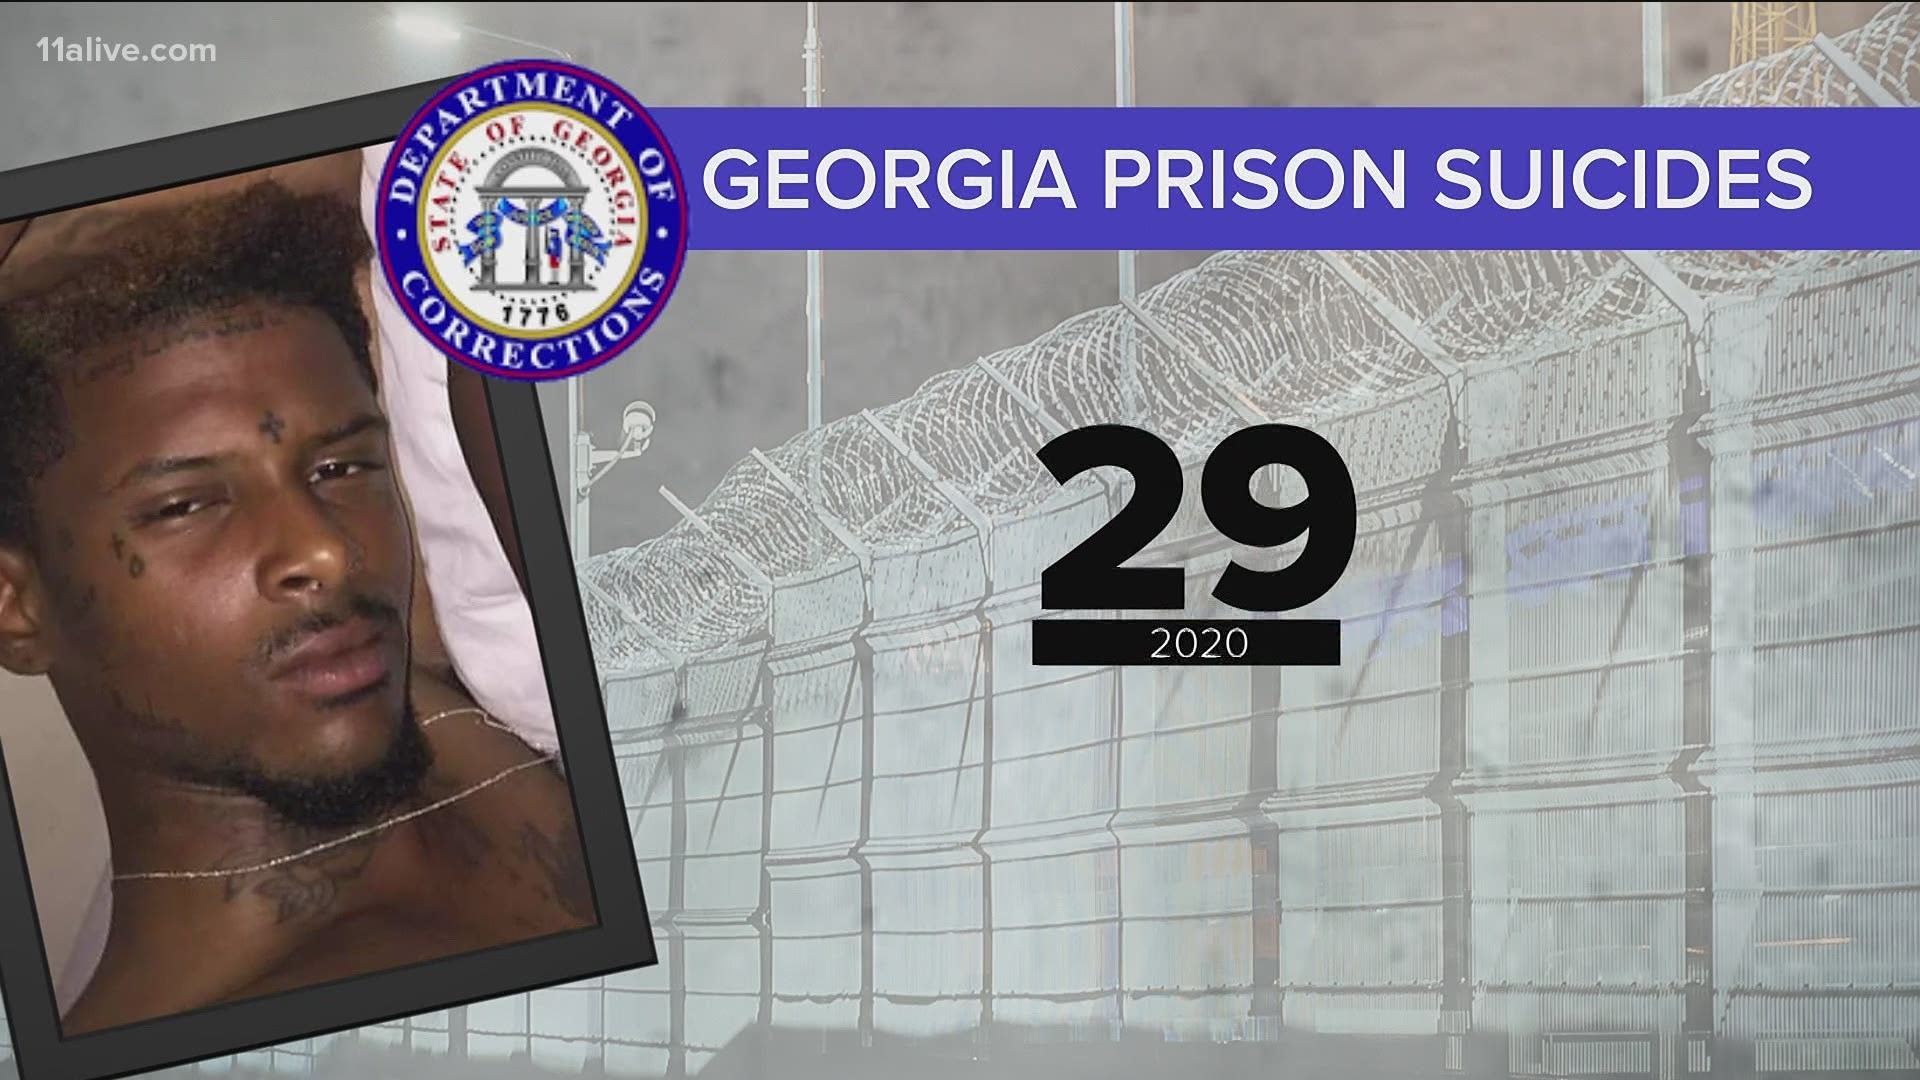 Bobby Thompson is one of at least 29 people who died by suicide at Georgia correctional facilities last year, a rate about three times the national average.